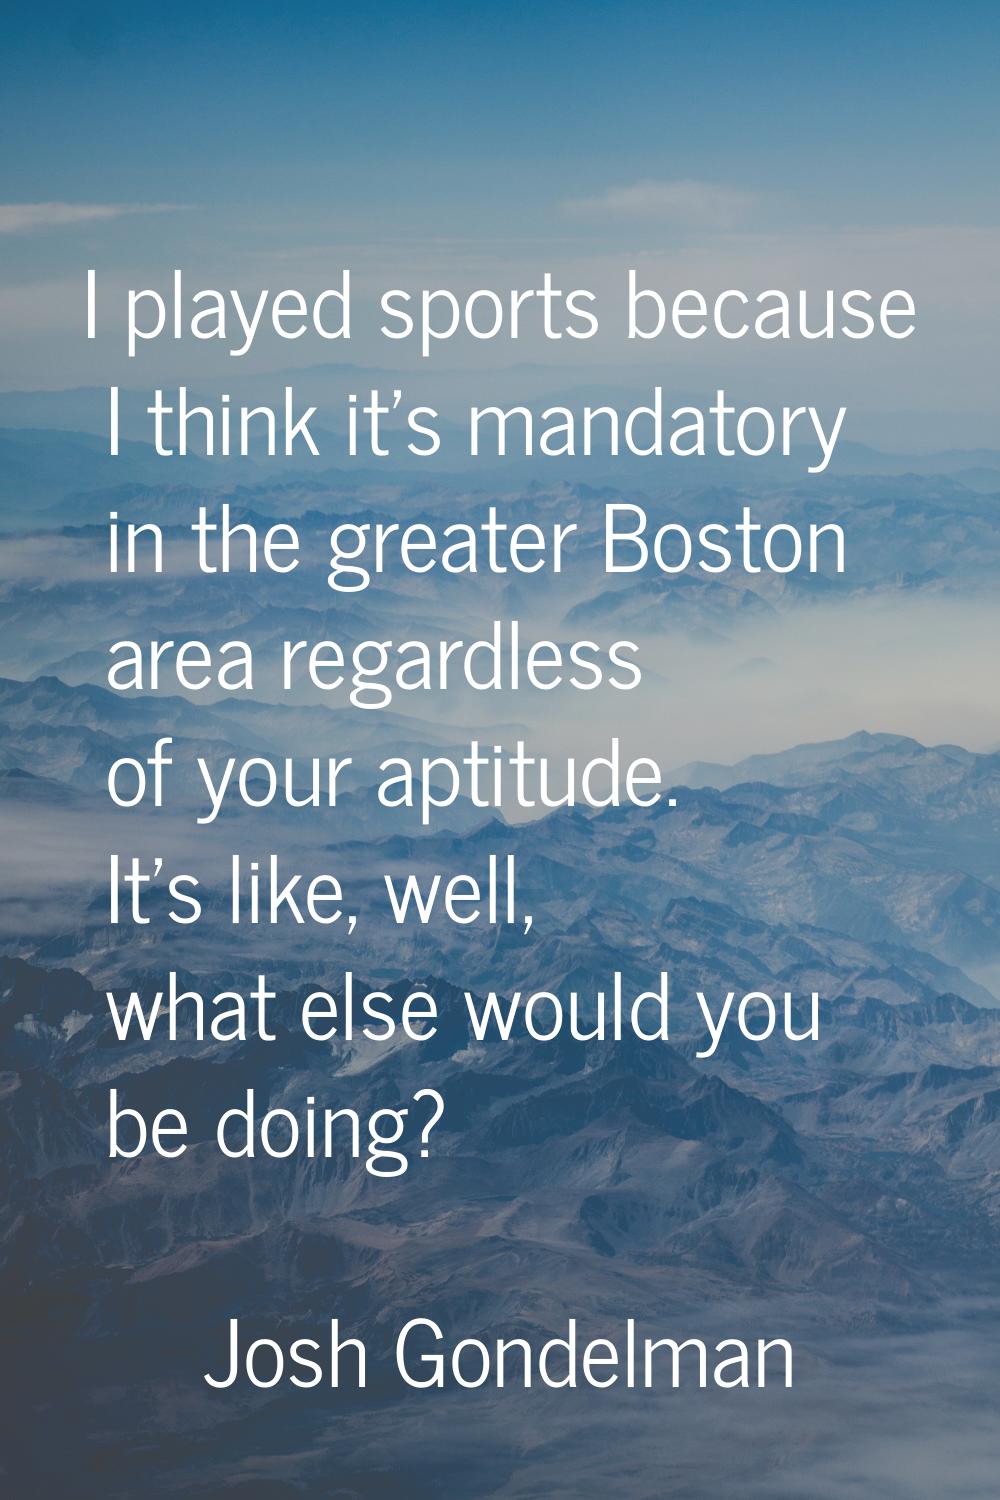 I played sports because I think it's mandatory in the greater Boston area regardless of your aptitu